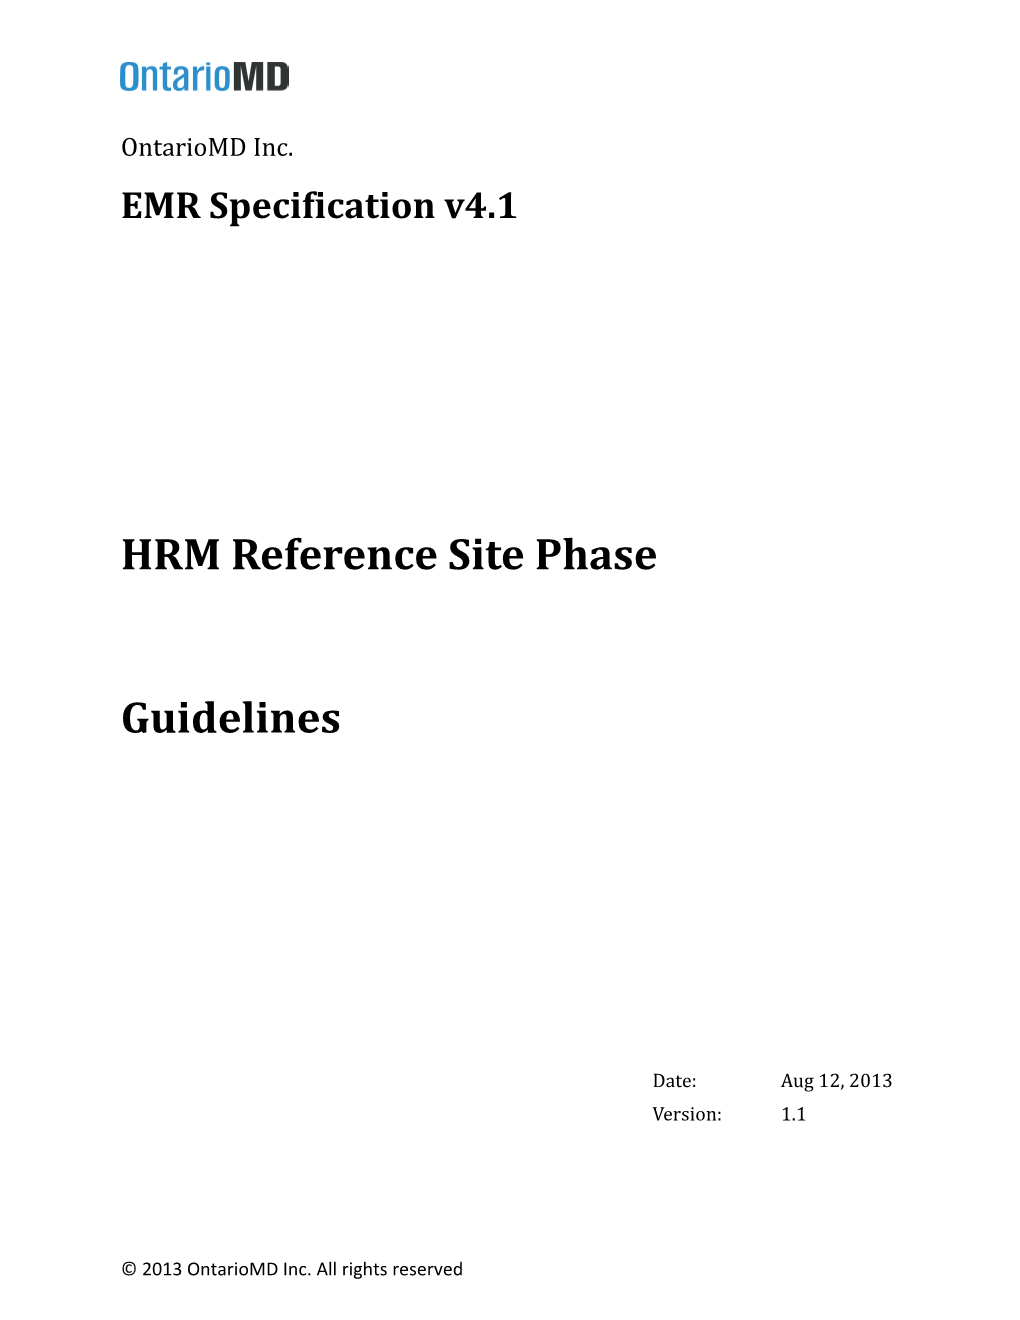 HRM Reference Site Phase Guidelines